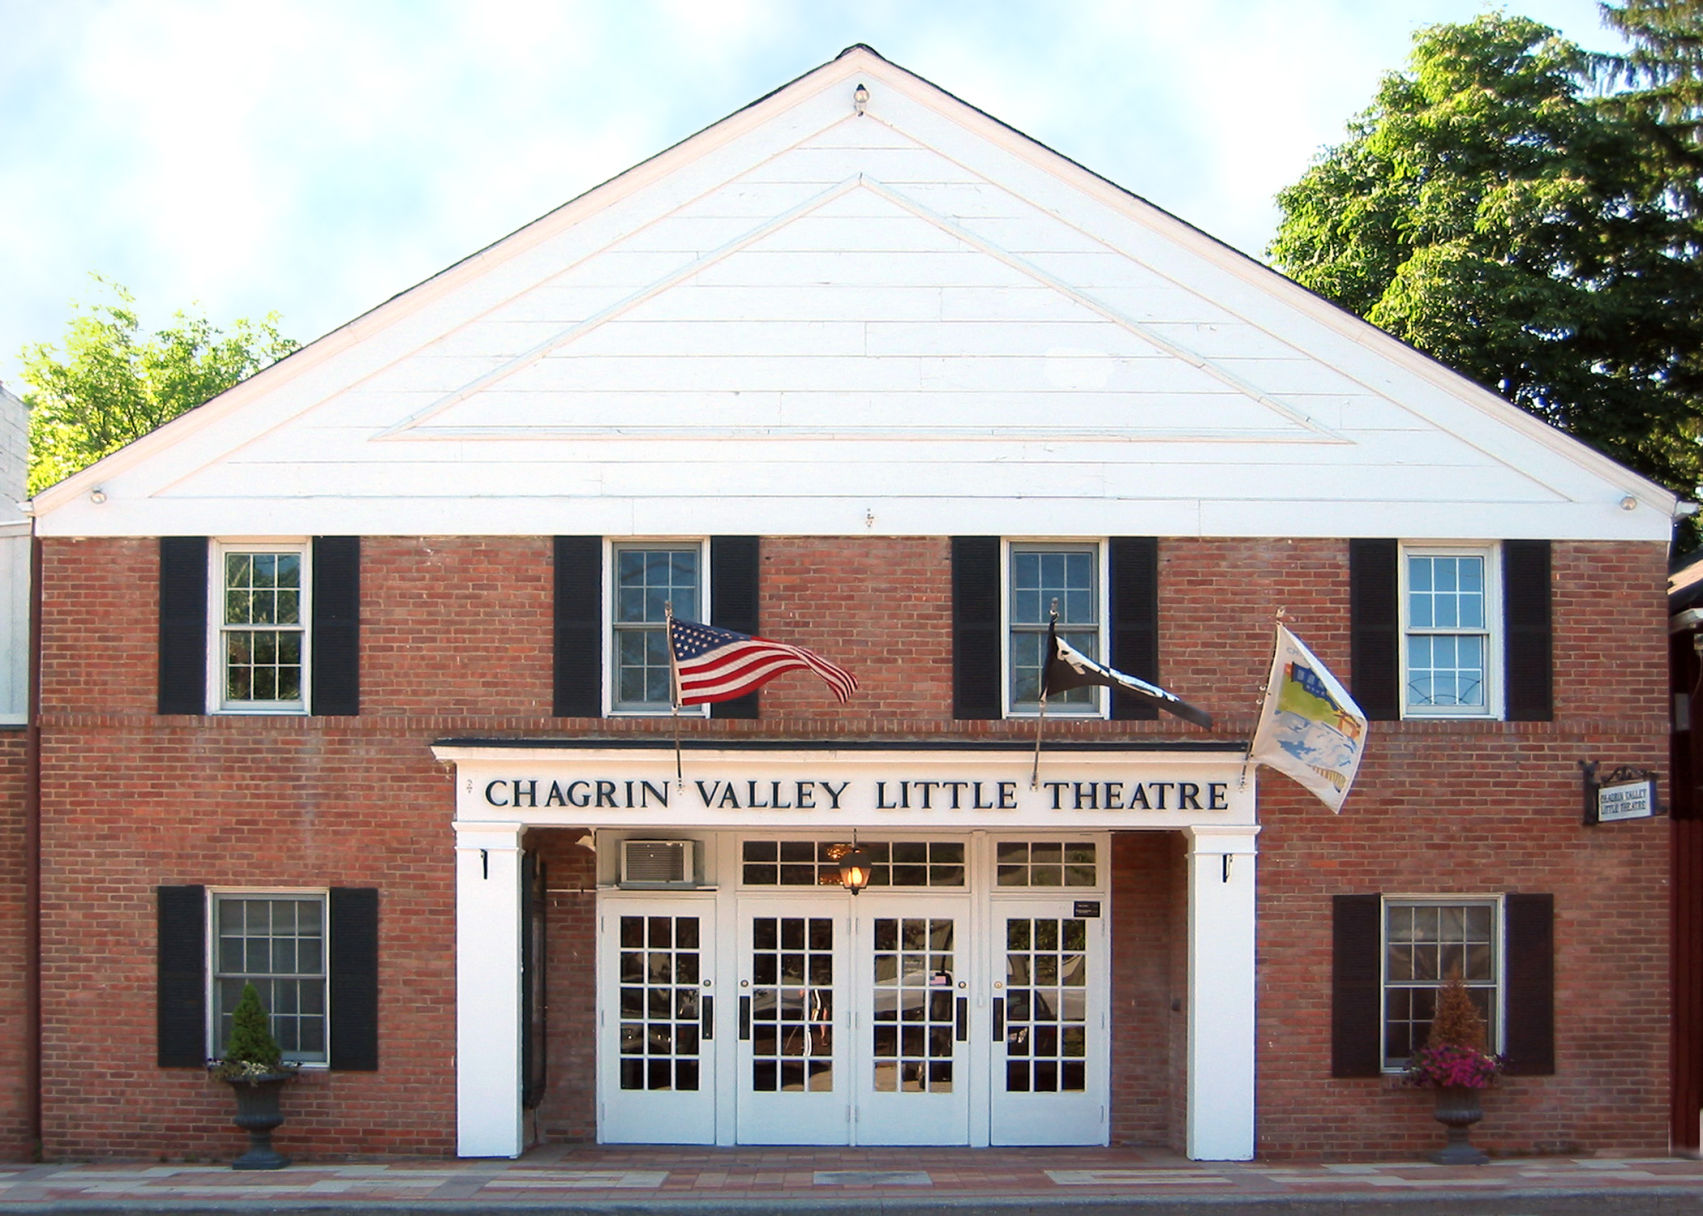 The Chagrin Valley Little Theatre is a landmark in downtown Chagrin Falls. Submitted photo